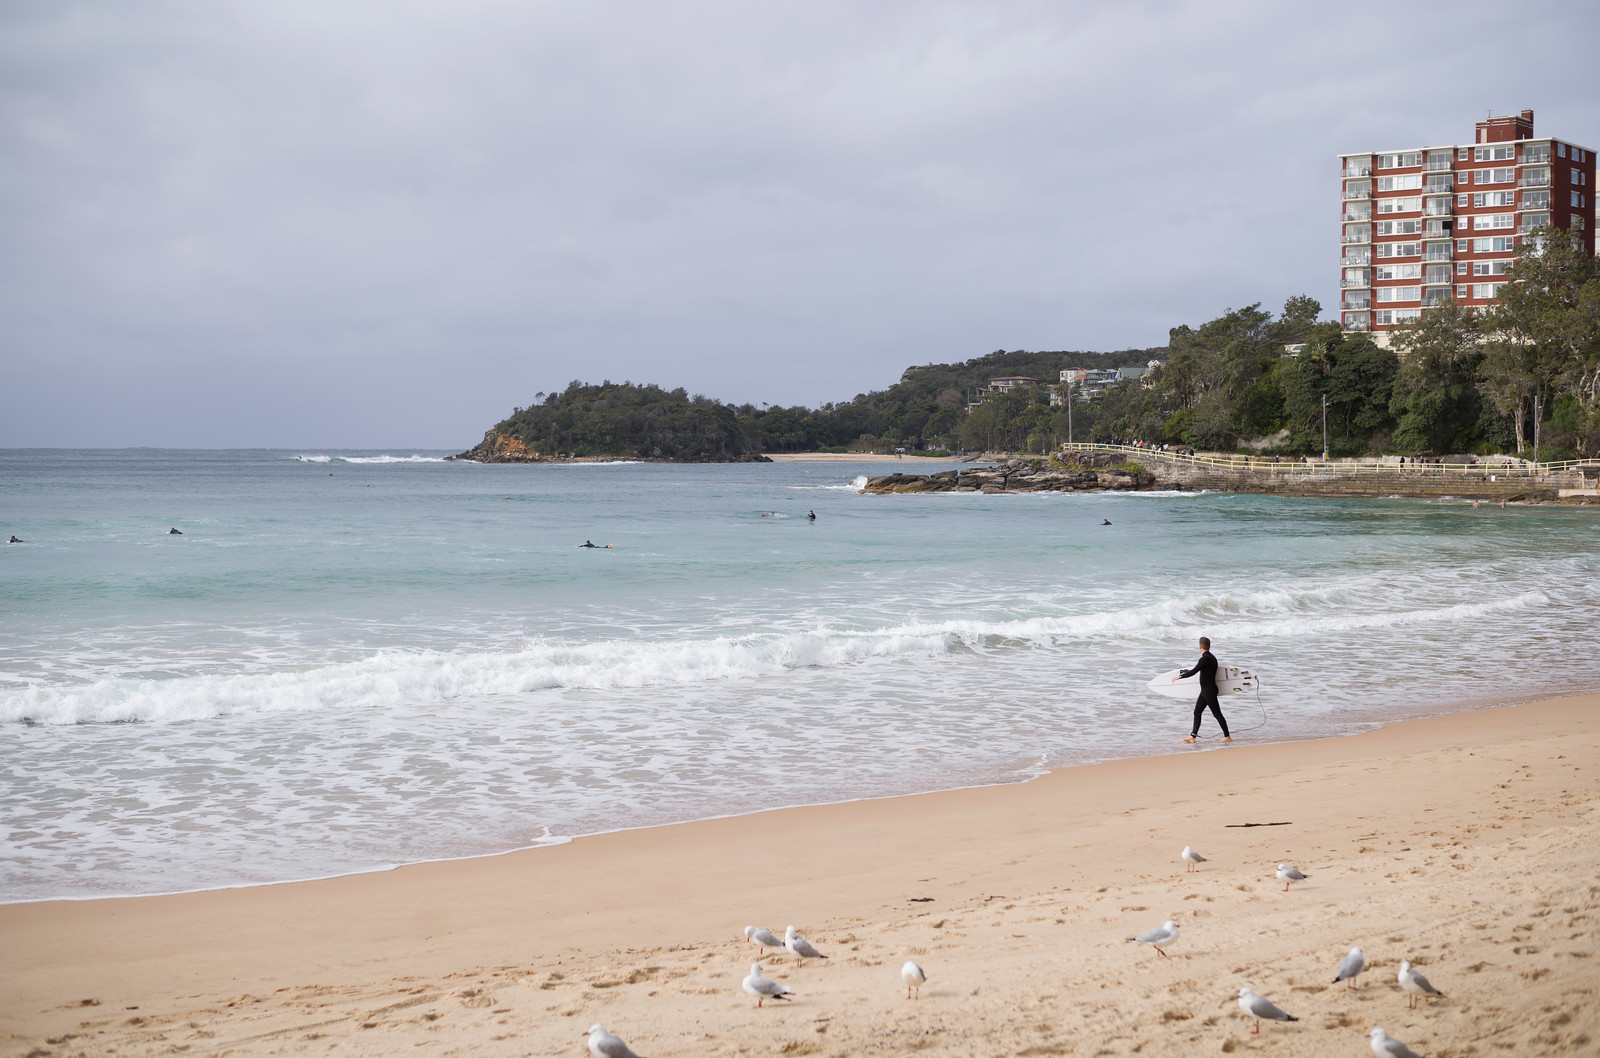 A surfer braving the chilly ocean at Manly Beach